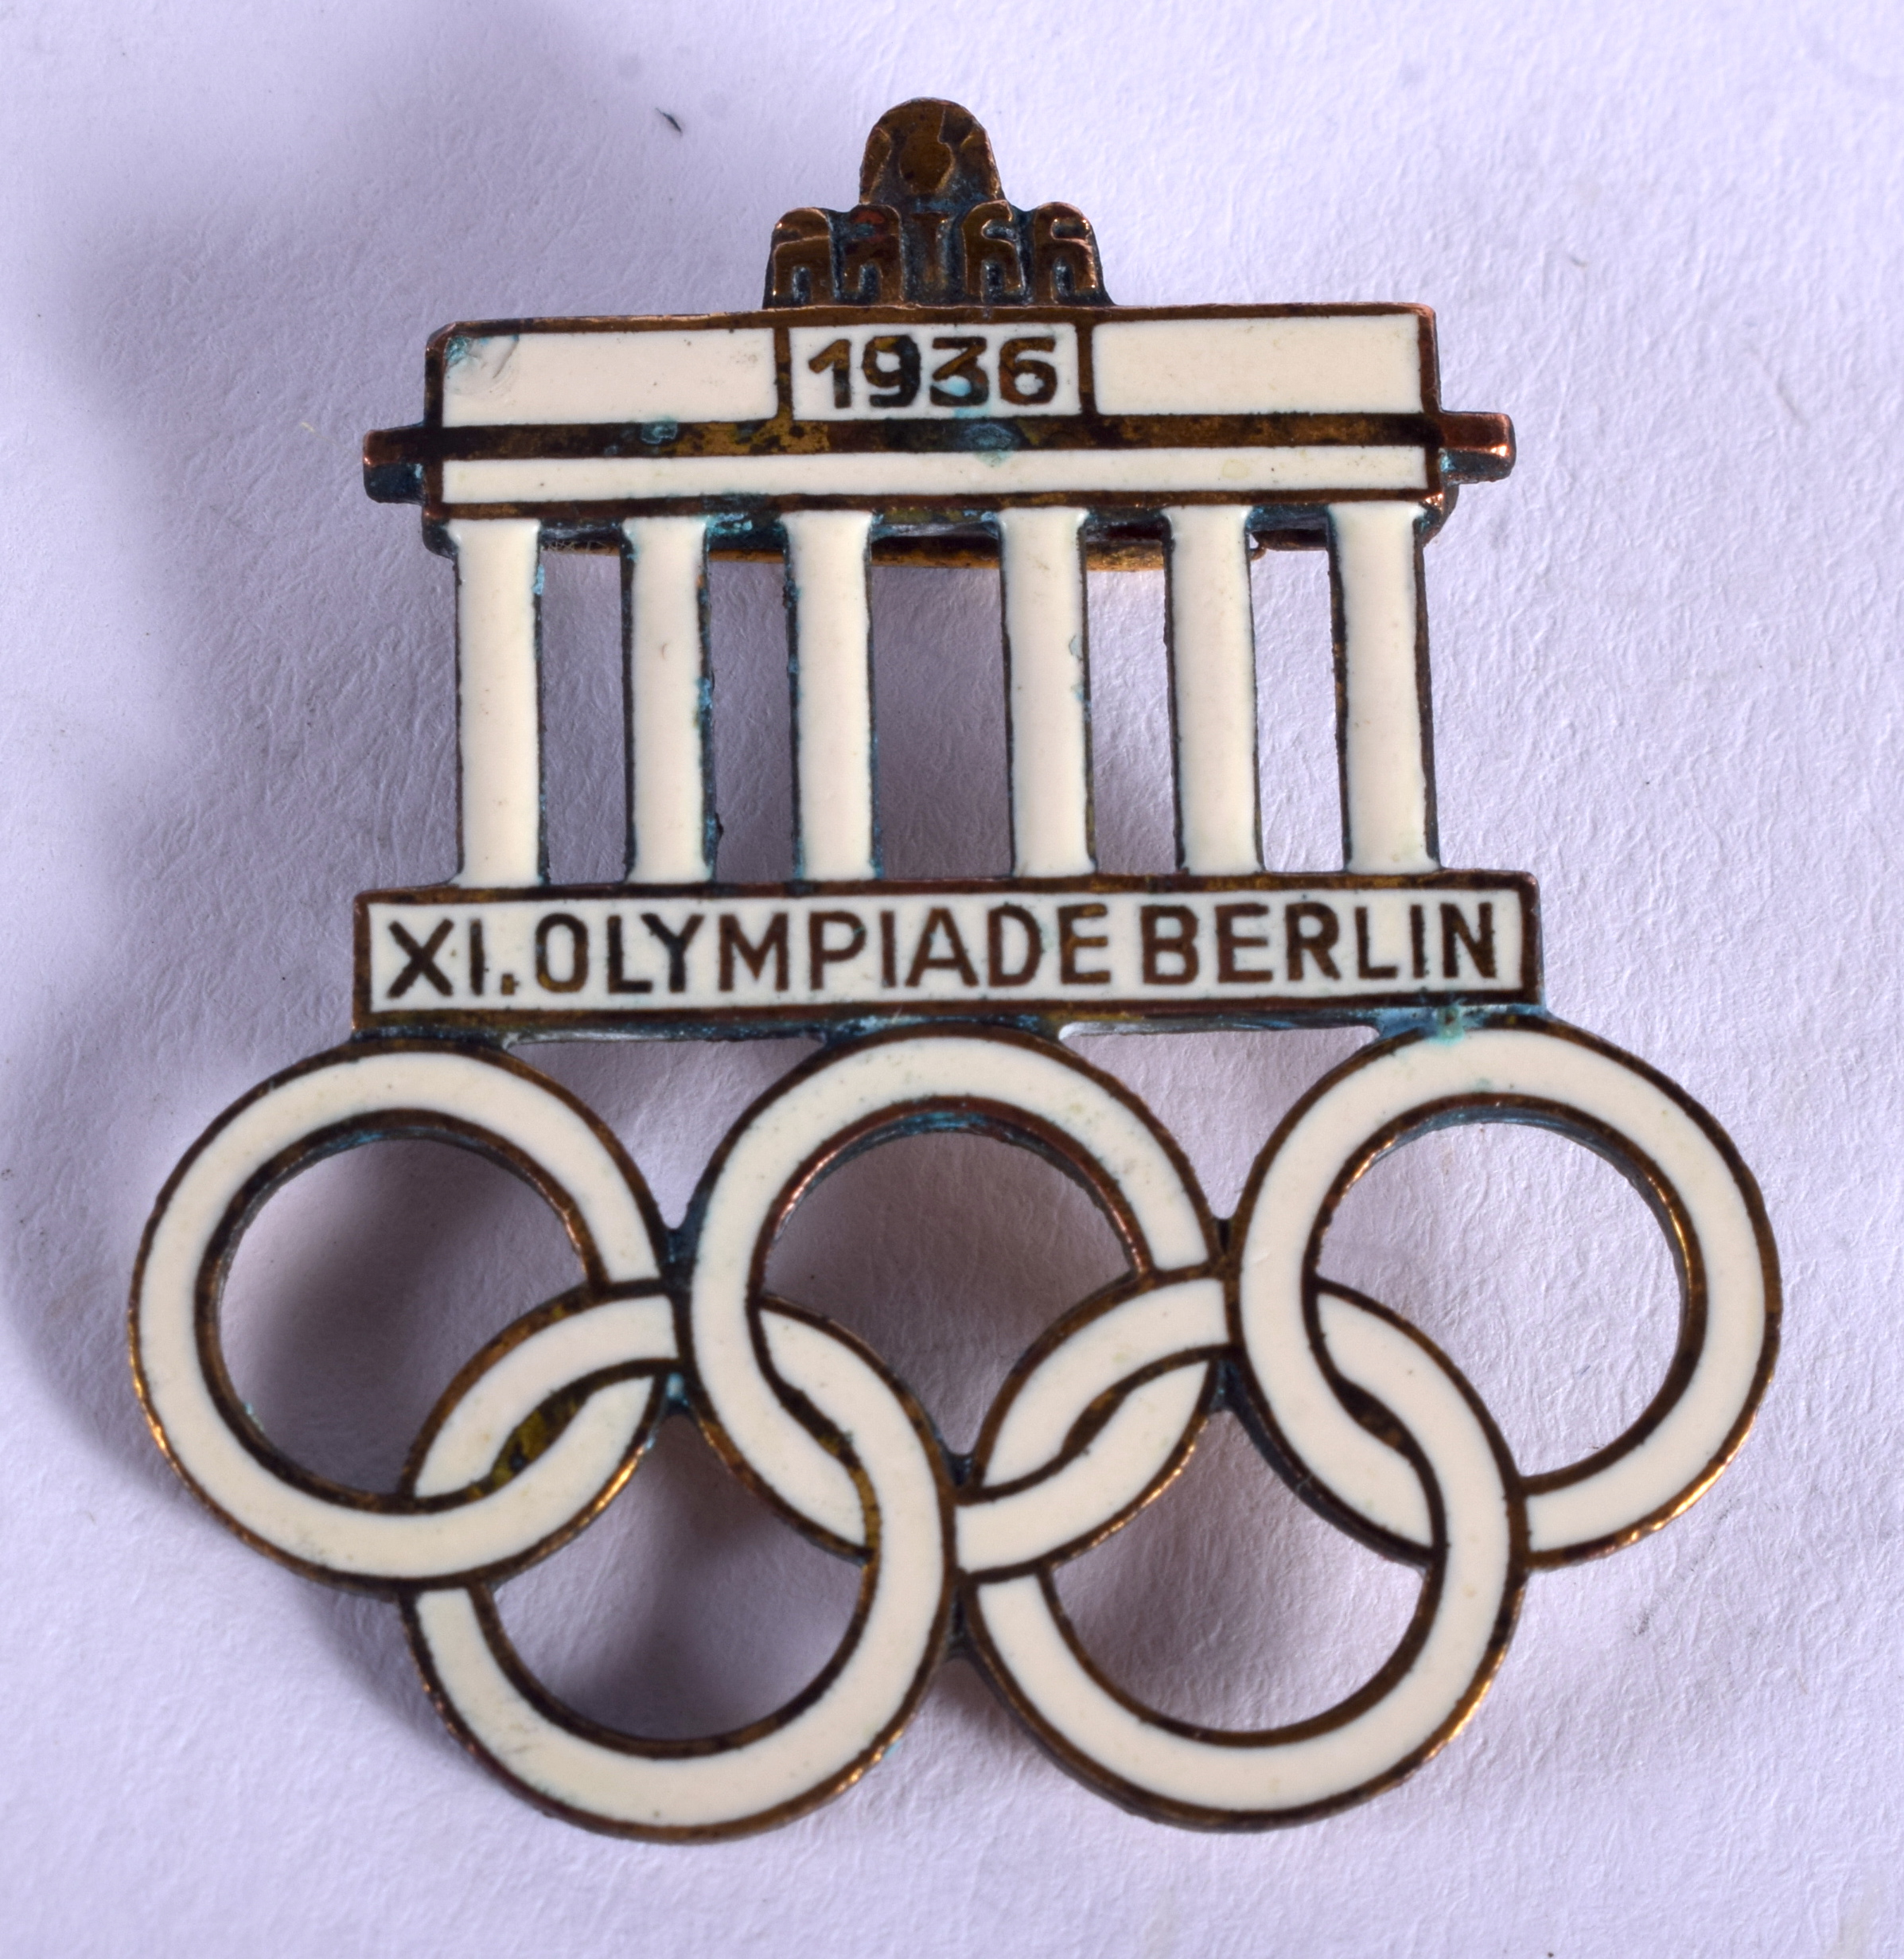 A RARE 1935 ENAMELLED OLYMPIC BROOCH. 4.9 grams. 3.25 cm wide.